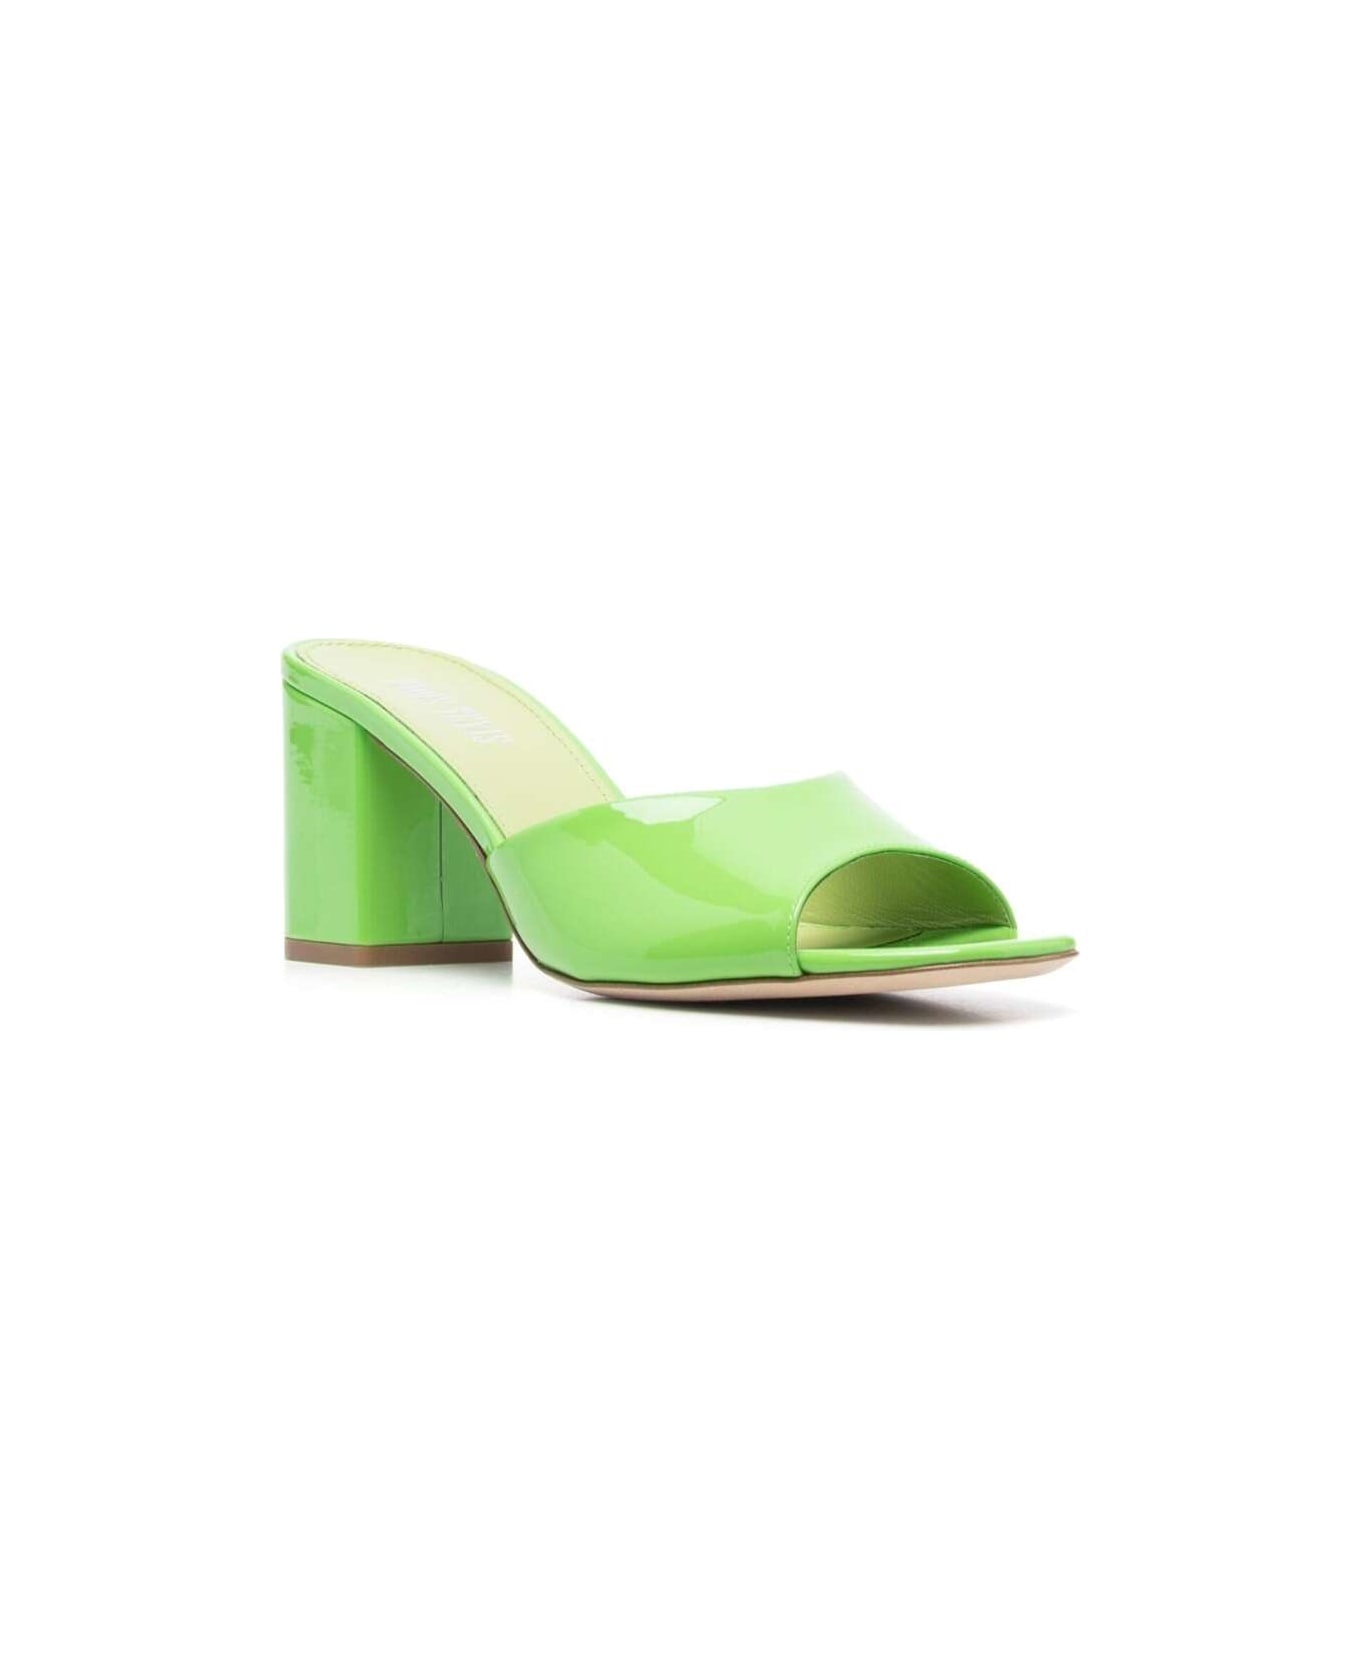 Paris Texas 'anja' Green Mules With Block Heel In Patent Leather Woman - Green